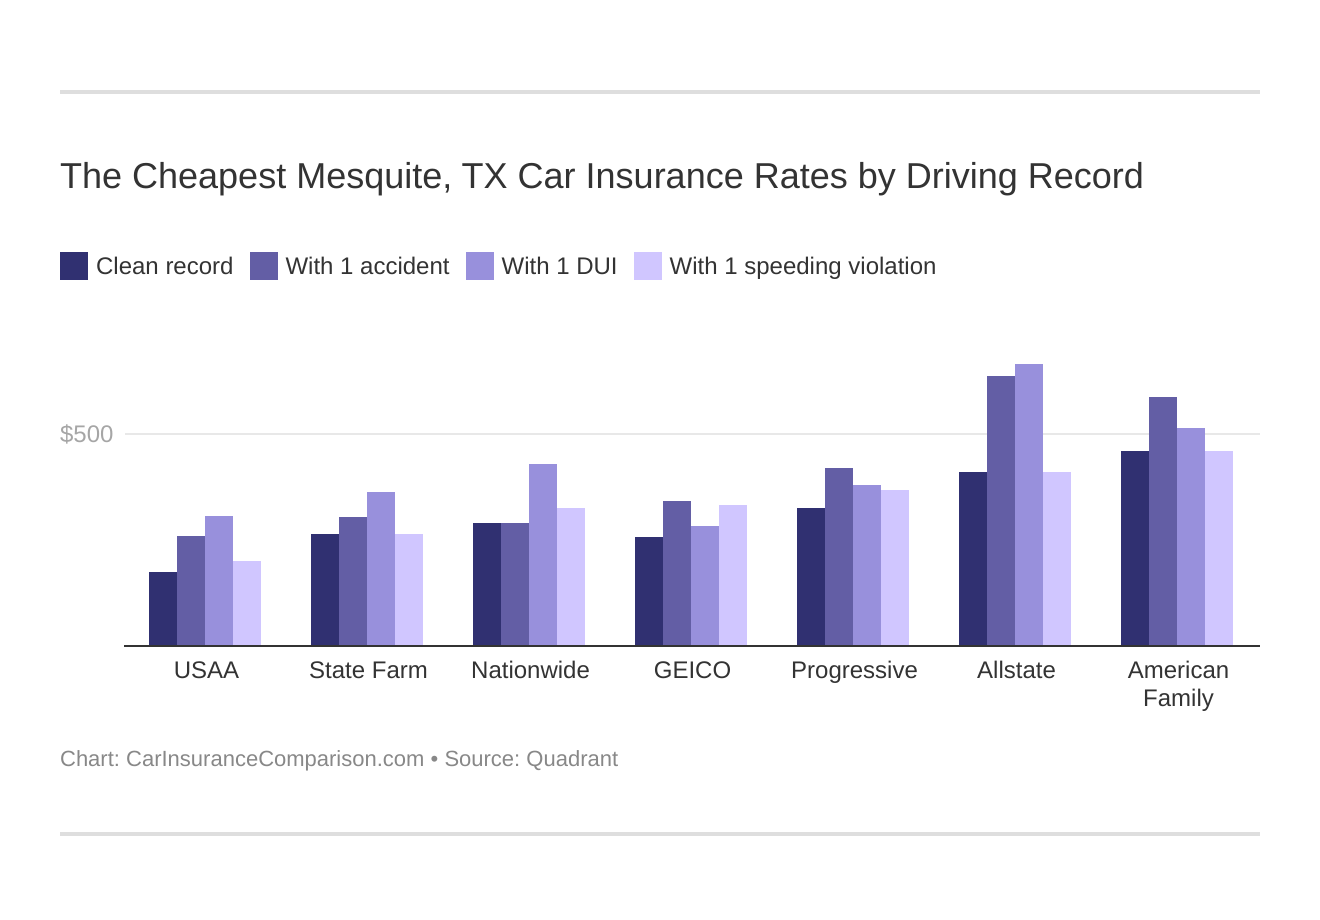 The Cheapest Mesquite, TX Car Insurance Rates by Driving Record